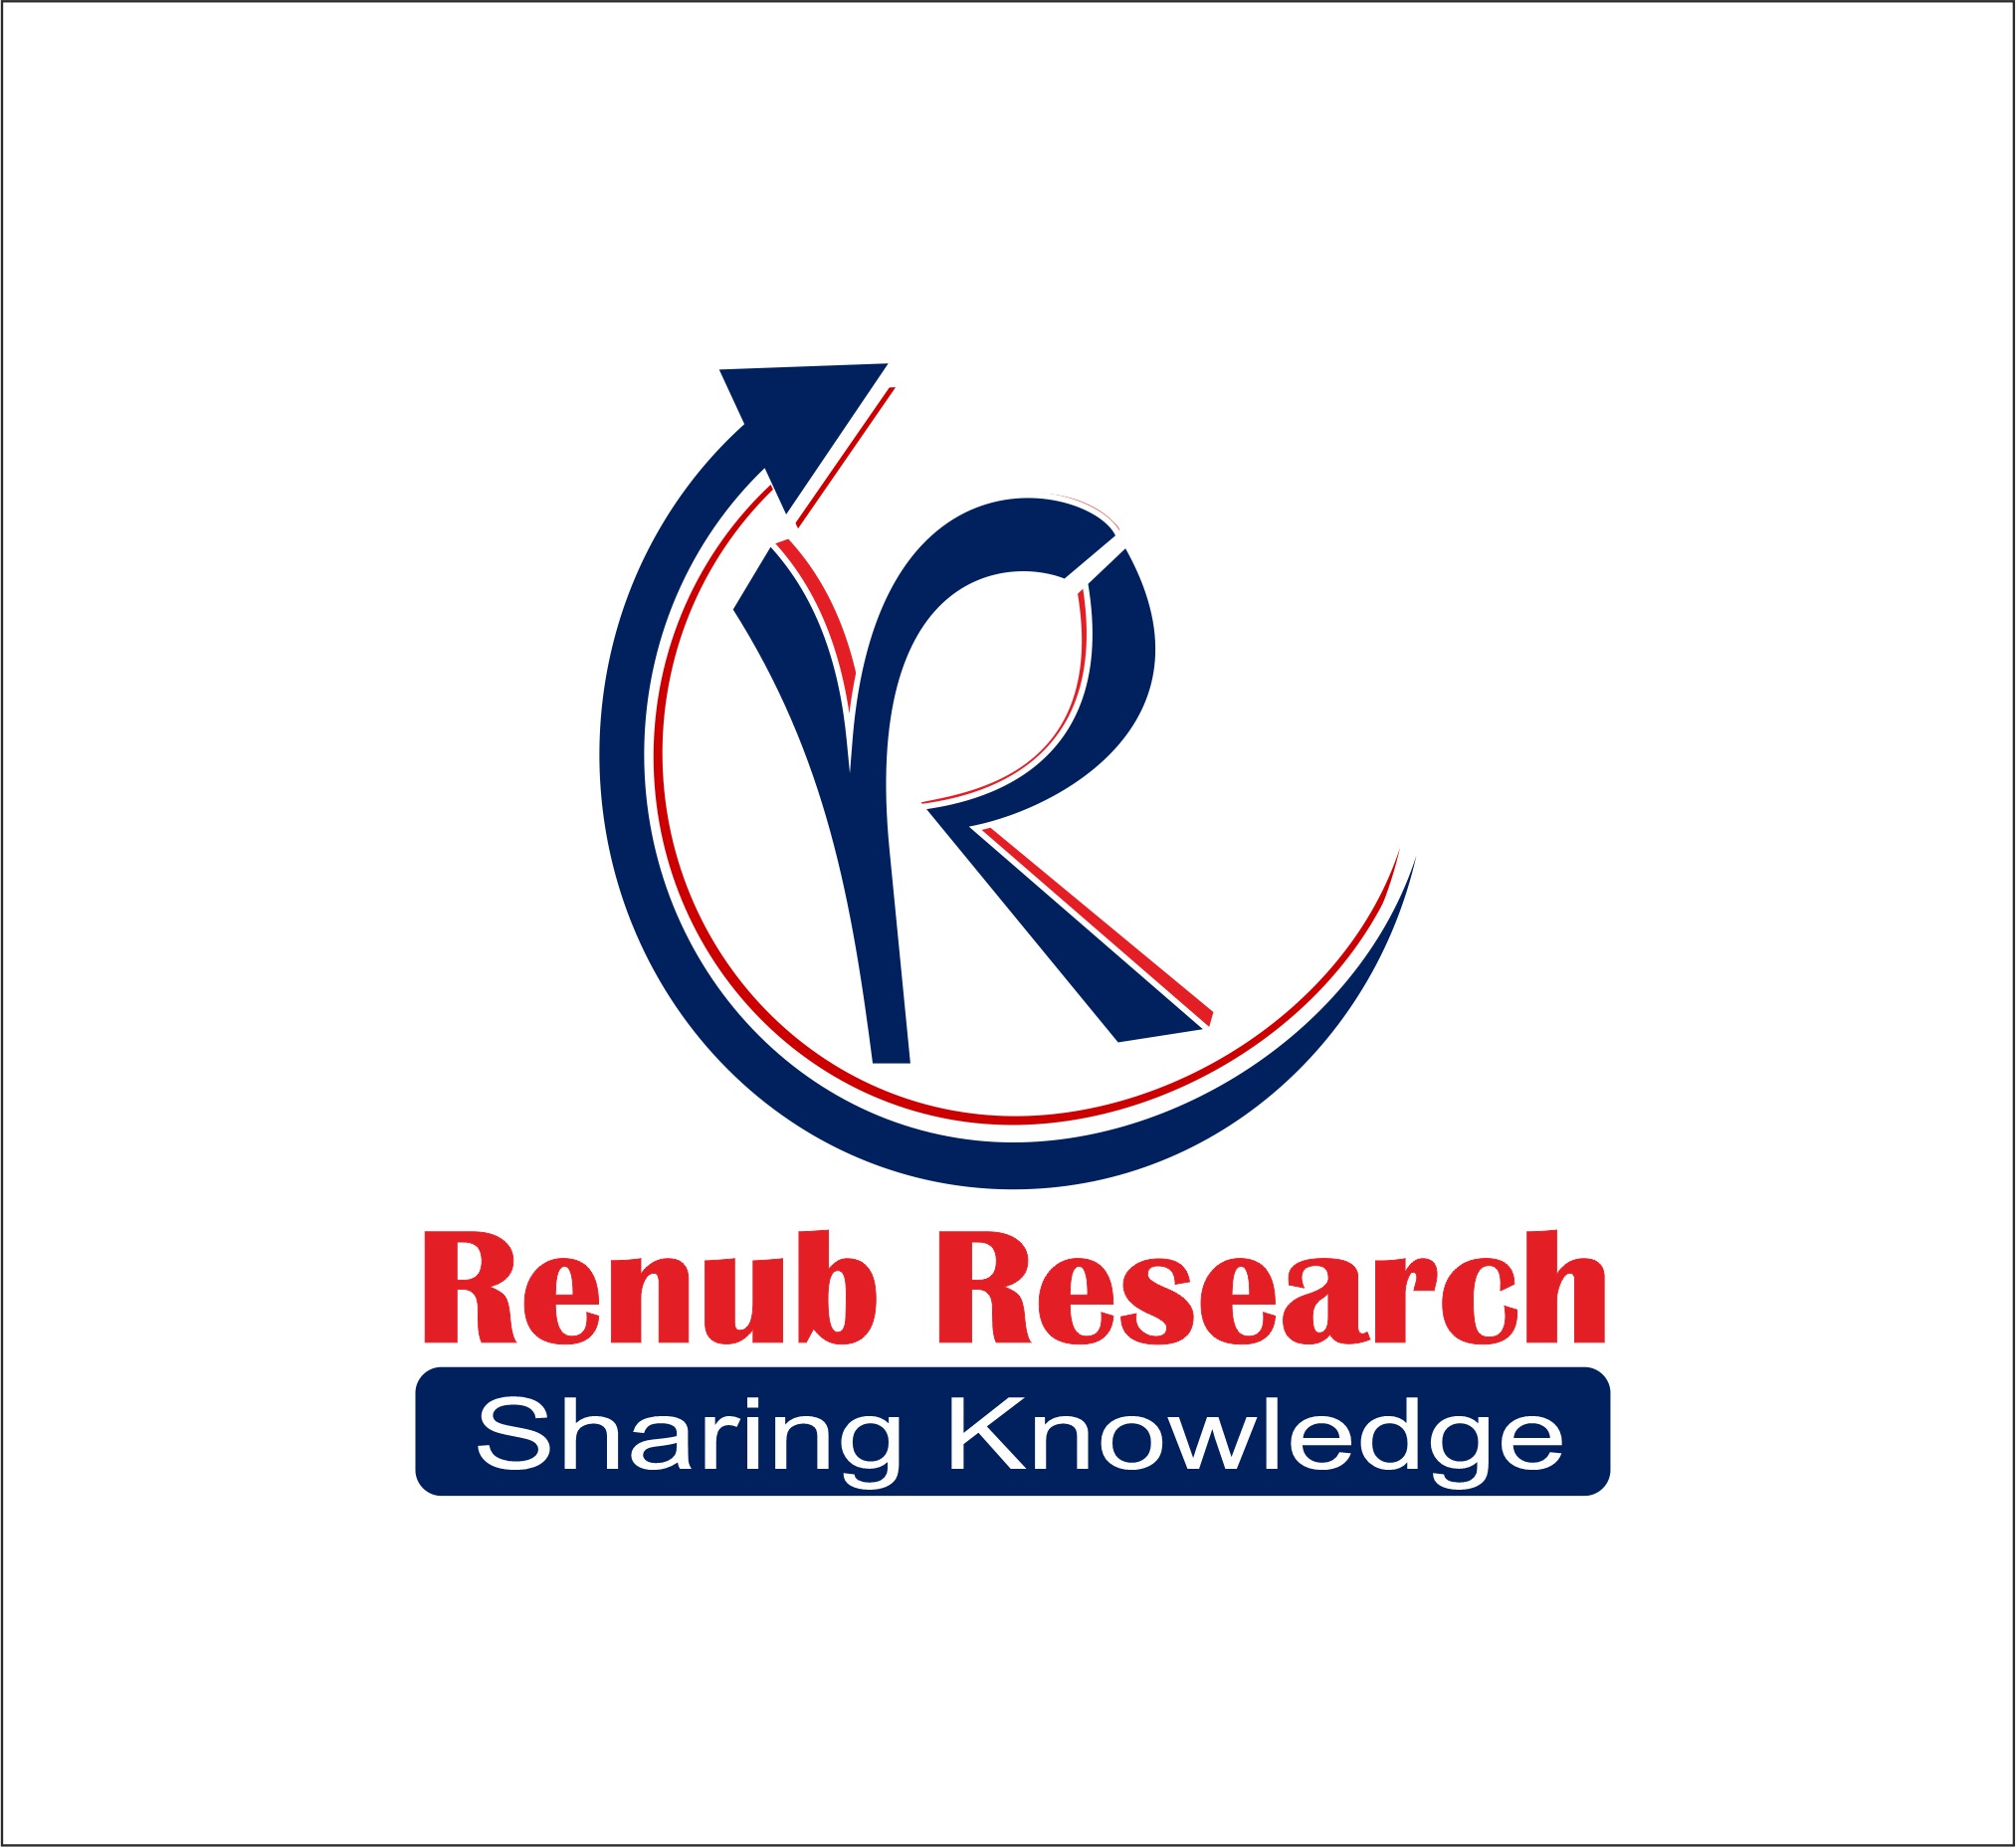 Global Squid Market will be more than US$ 11.6 Billion by 2025 | Renub Research